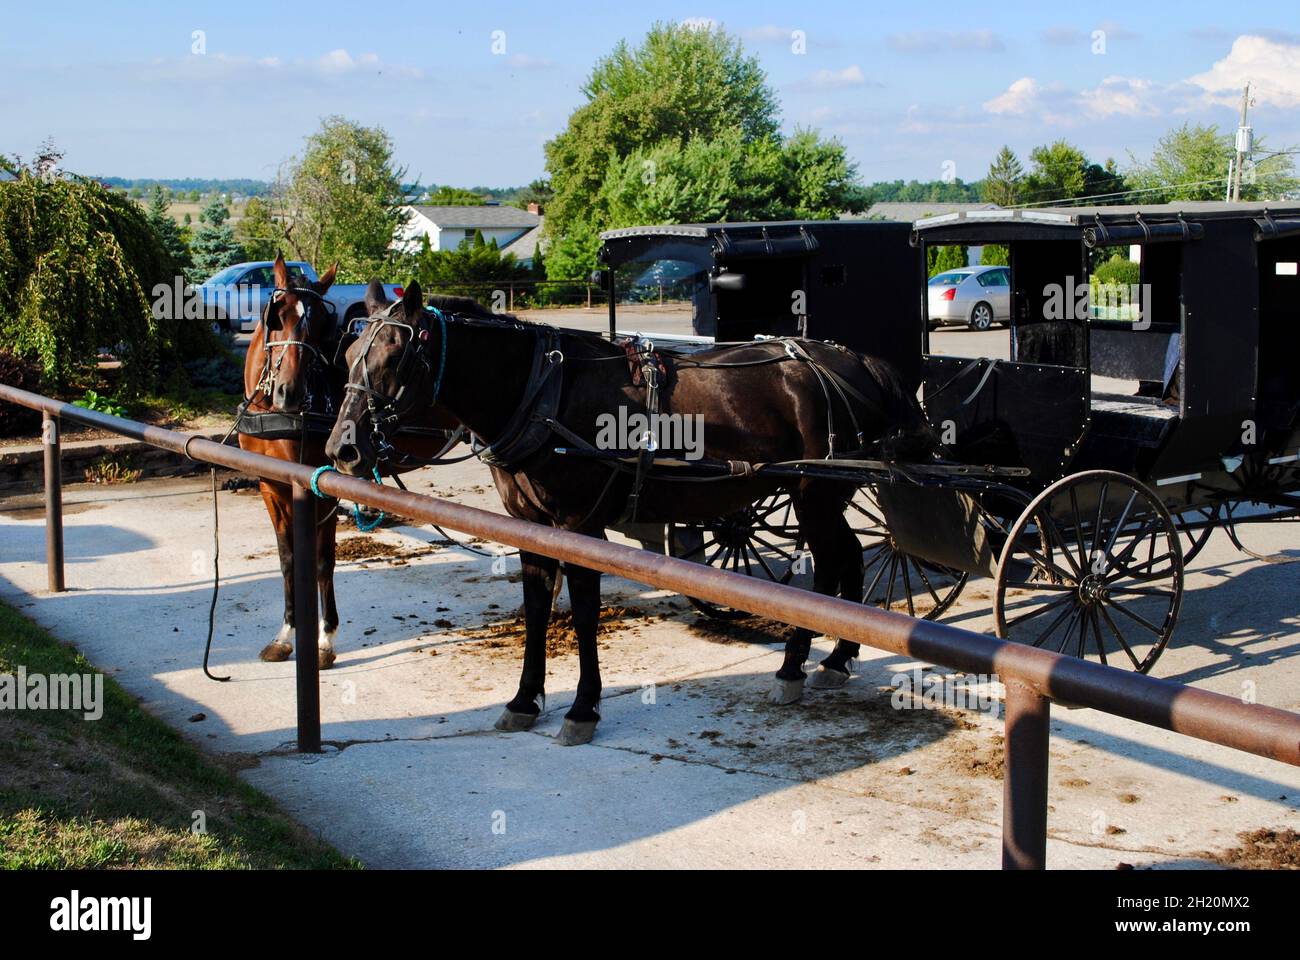 Horses and carridges at the Amish country in Ohio,USA Stock Photo